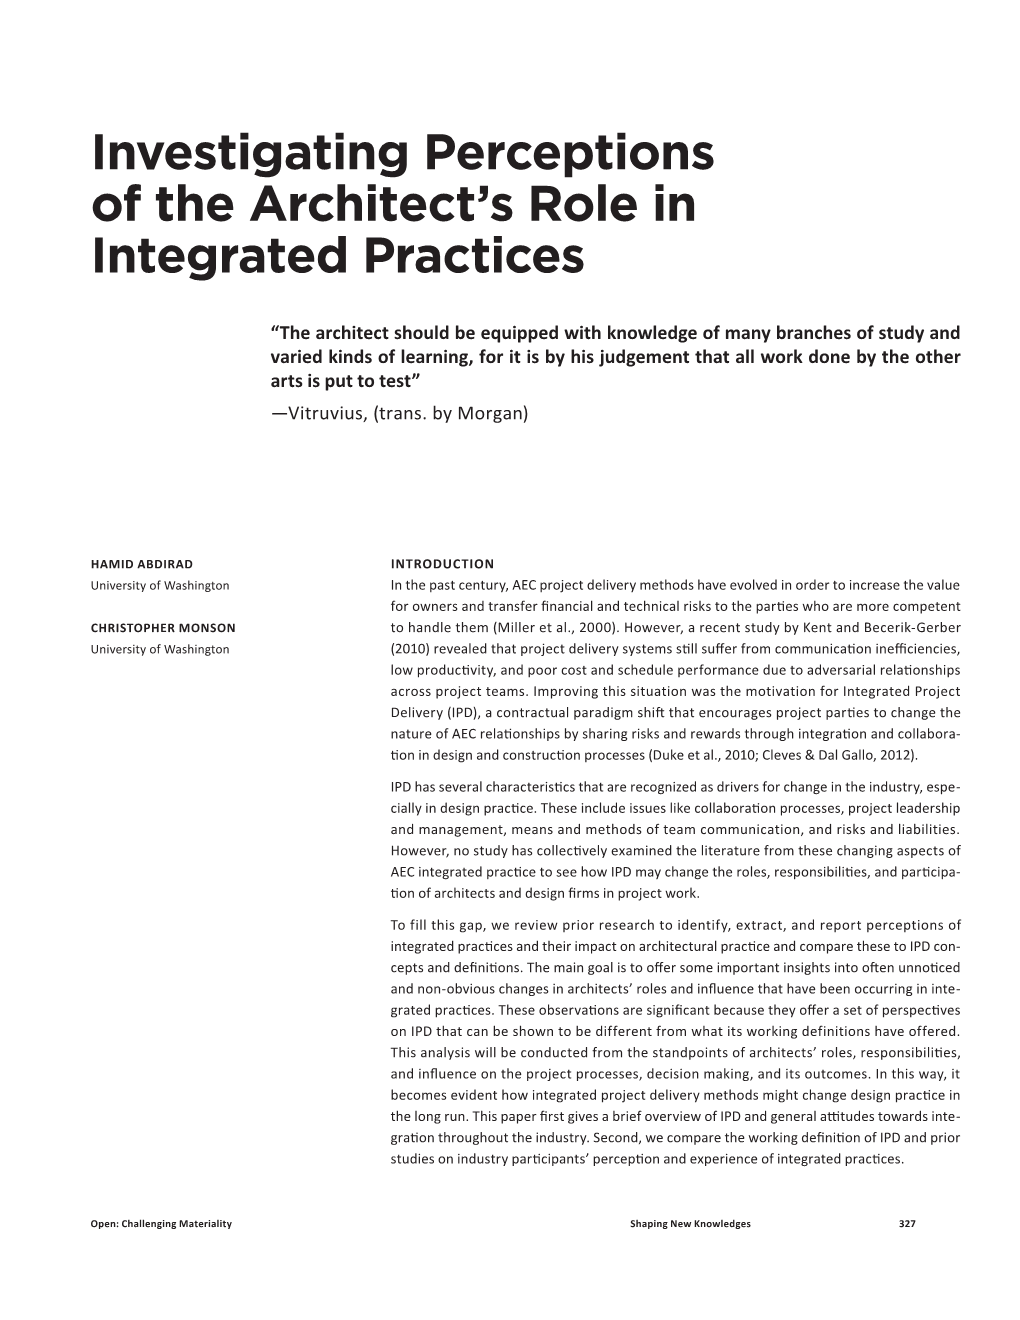 Investigating Perceptions of the Architect's Role in Integrated